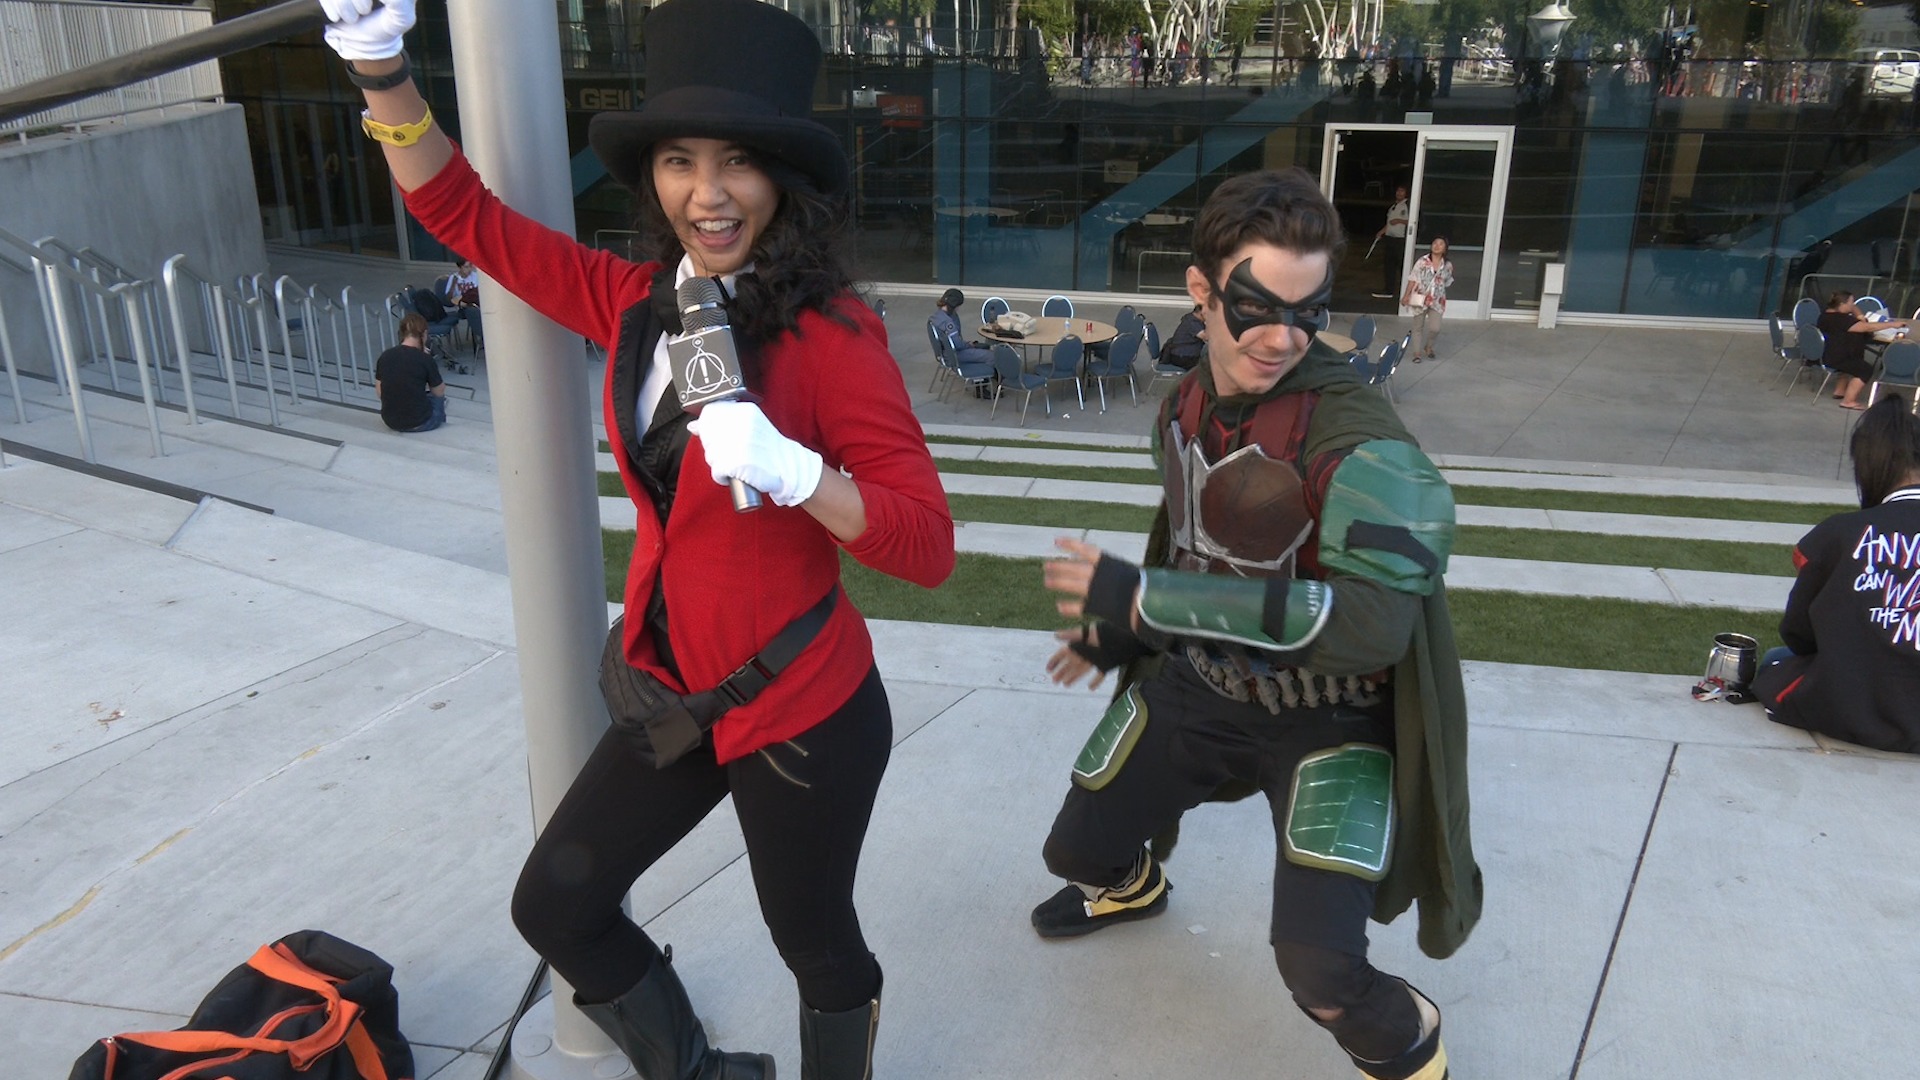 Striking a pose, cosplayers Briore as Brendon Urie from Panic! At The Disco and Danny Black as Robin / Nightwing from "DC's Titans"